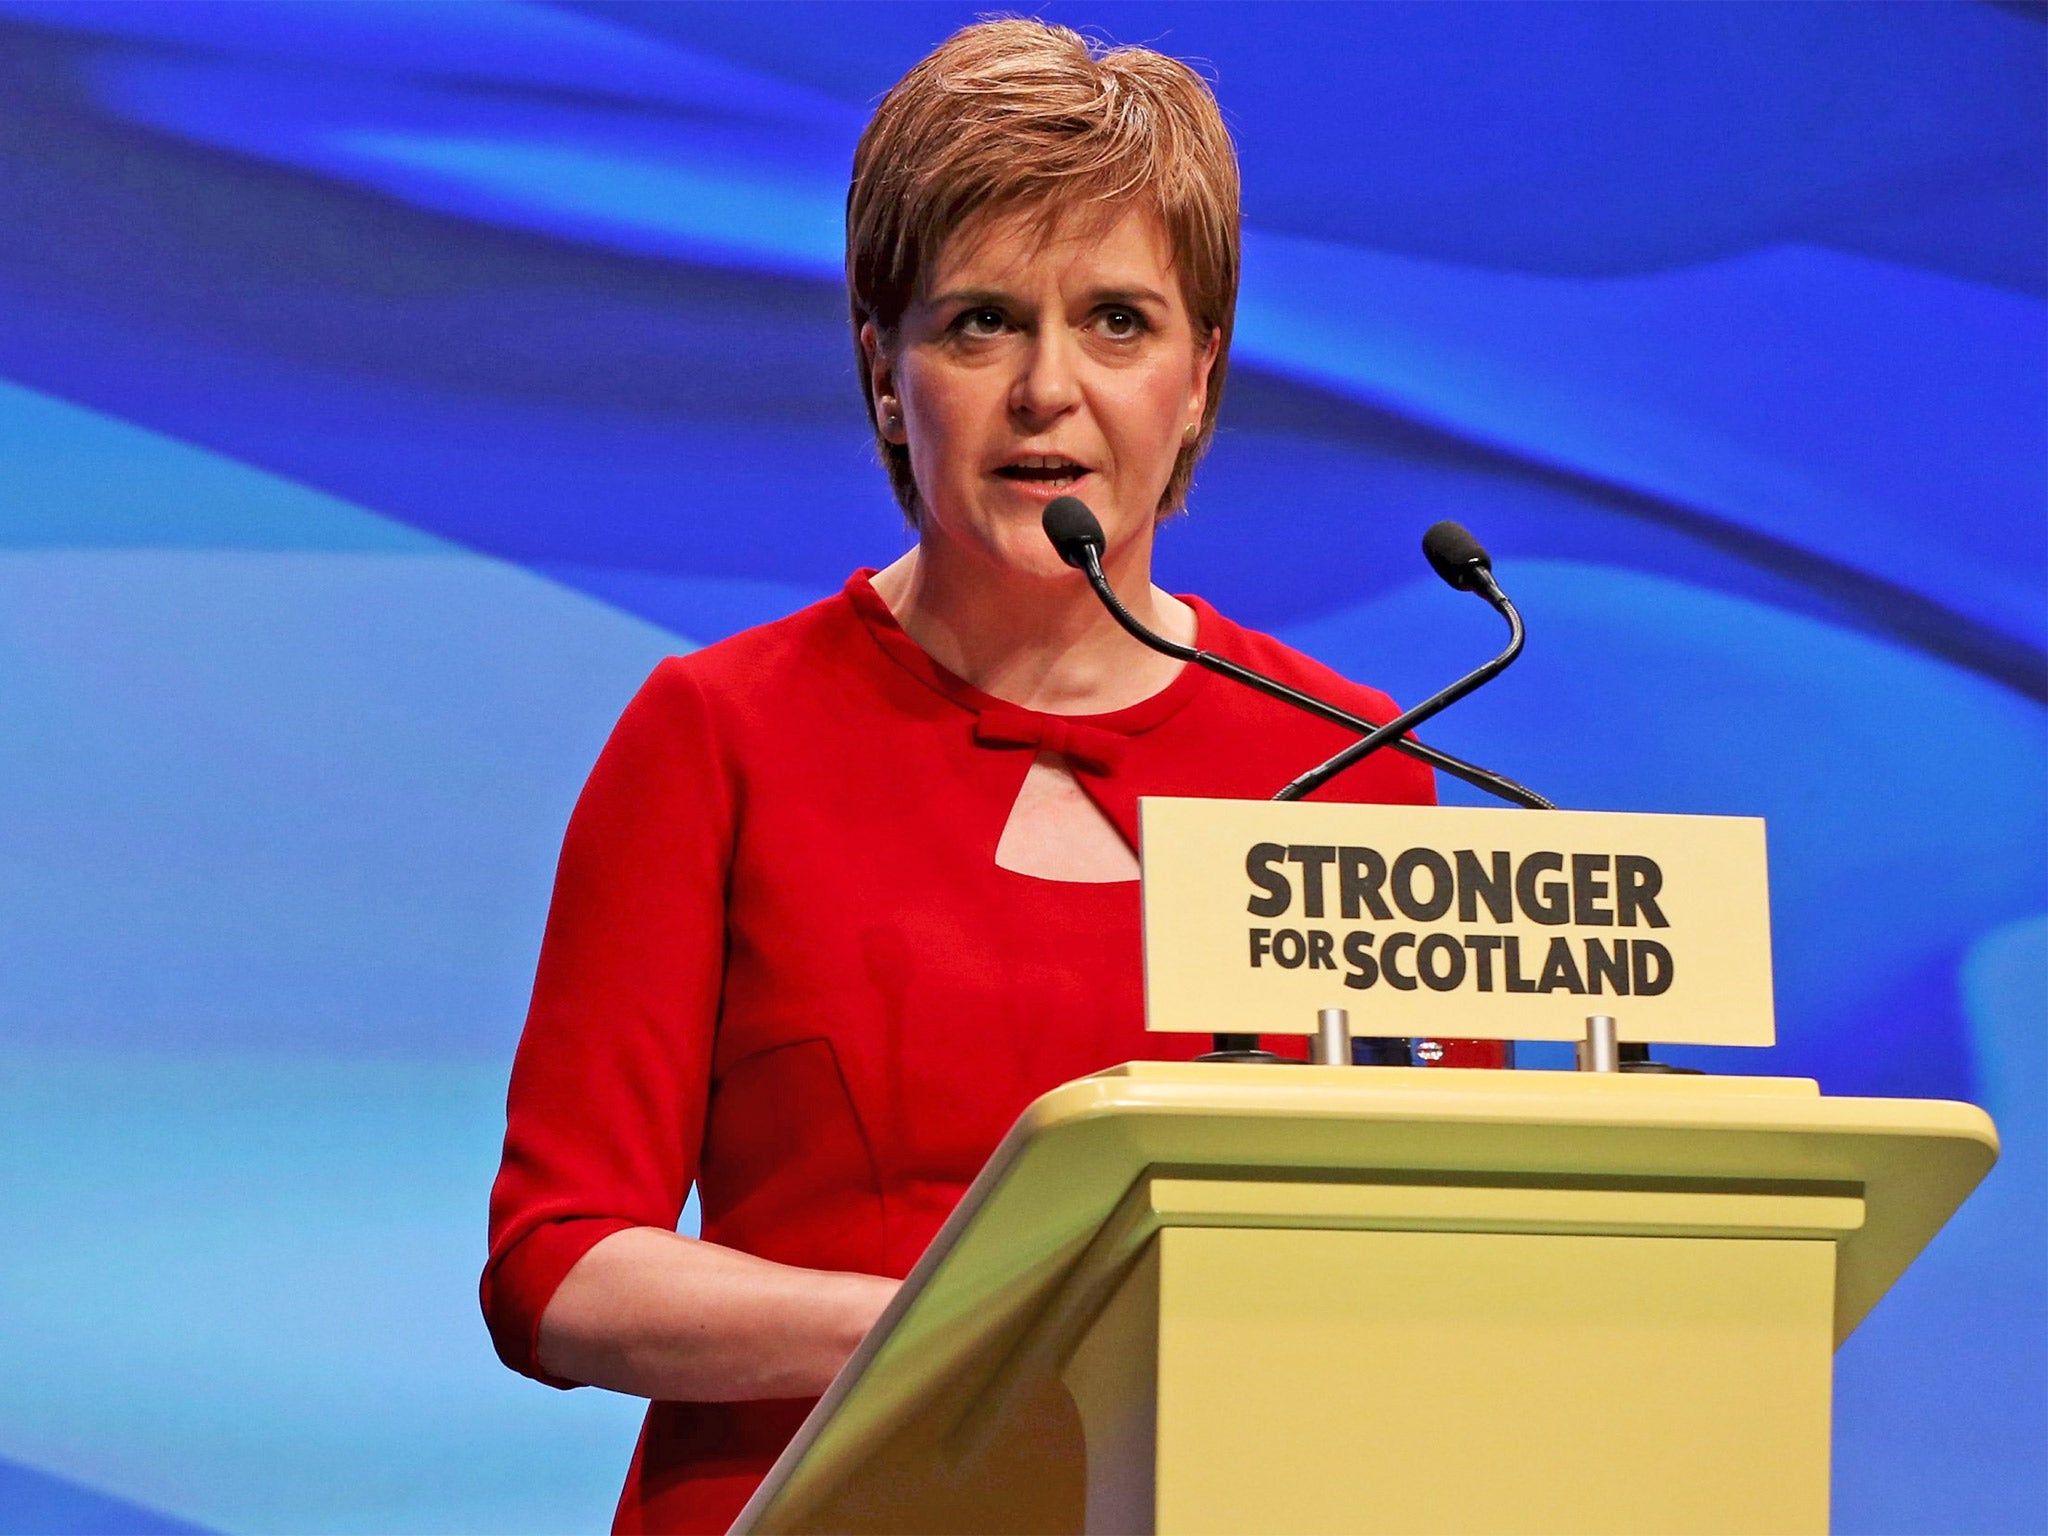 &#13;
Nicola Sturgeon at the SNP conference earlier this month&#13;